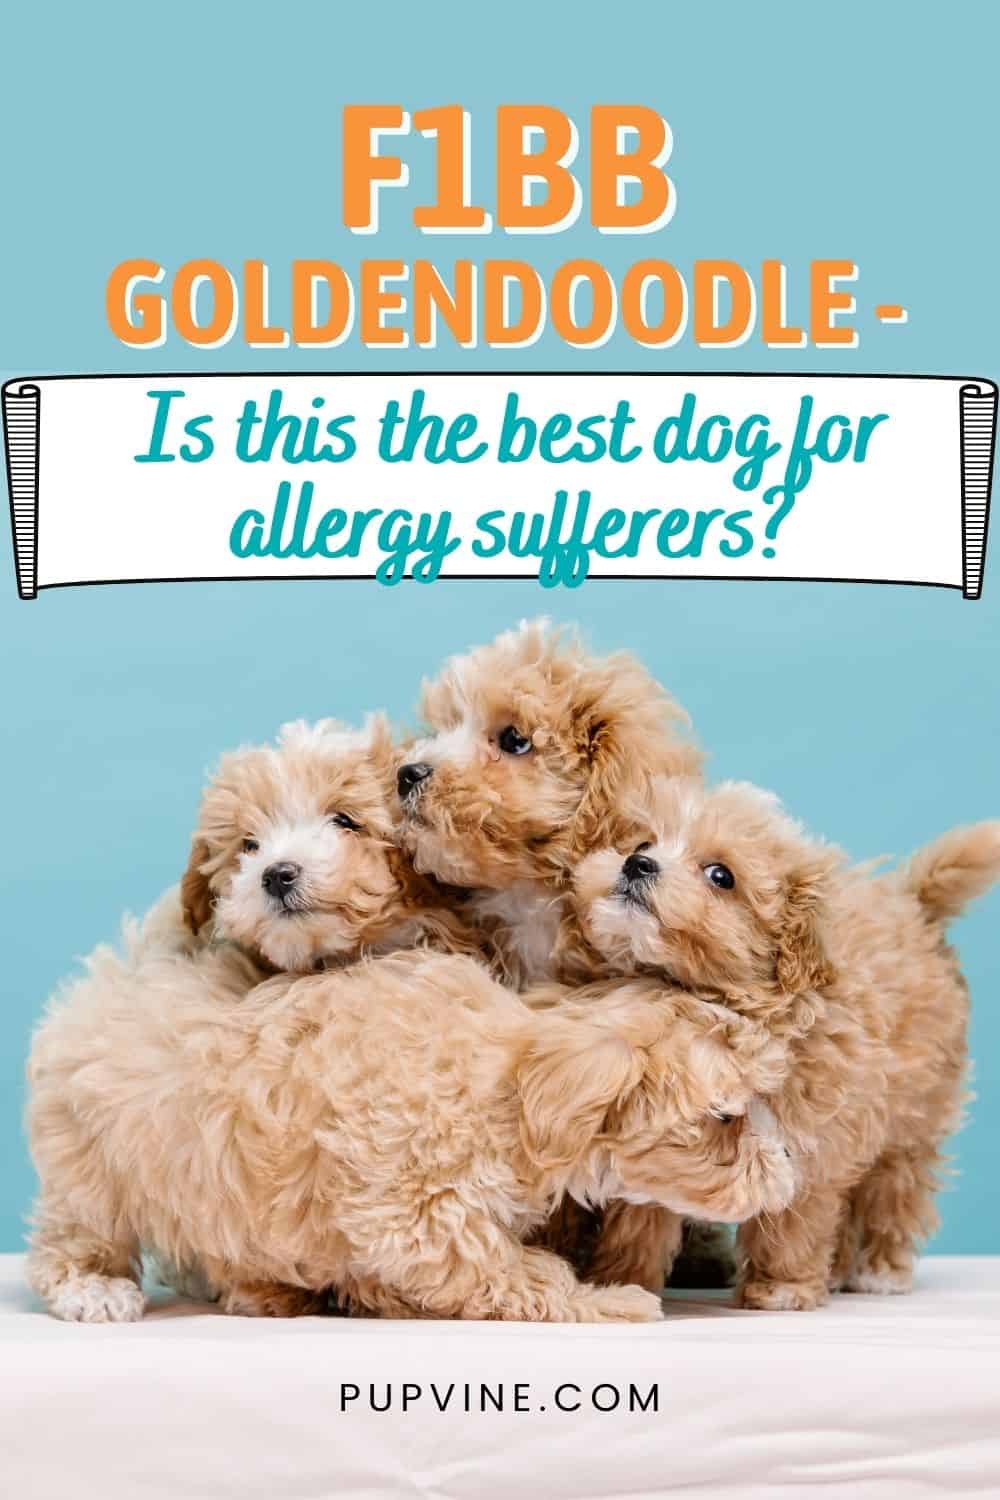 F1BB Goldendoodle - Is This The Best Dog For Allergy Sufferers